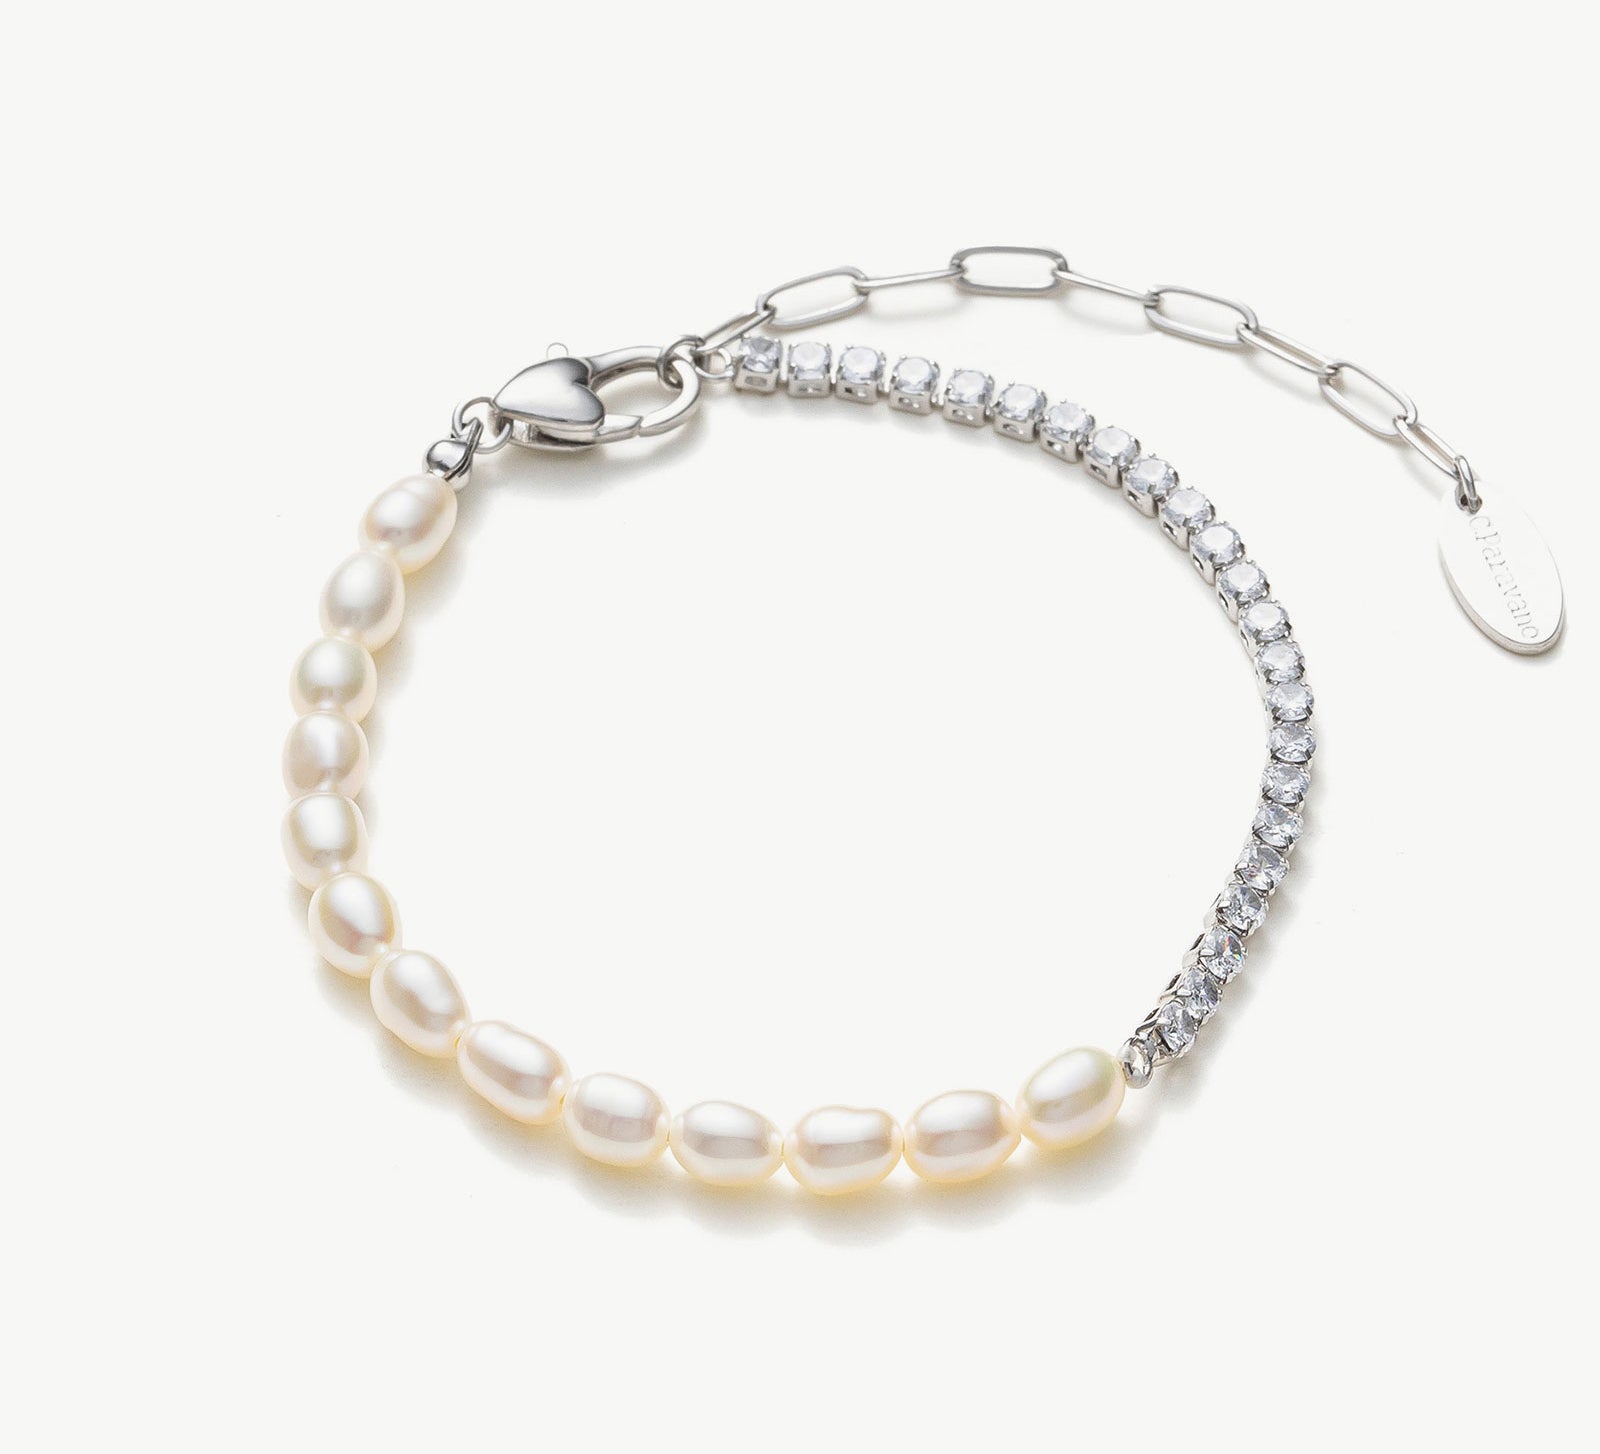 Pearl Crystal Chain Bracelet in Platinum, exuding timeless elegance with a delicate platinum chain adorned with lustrous pearls and sparkling crystals, this bracelet offers a luxurious and refined accessory